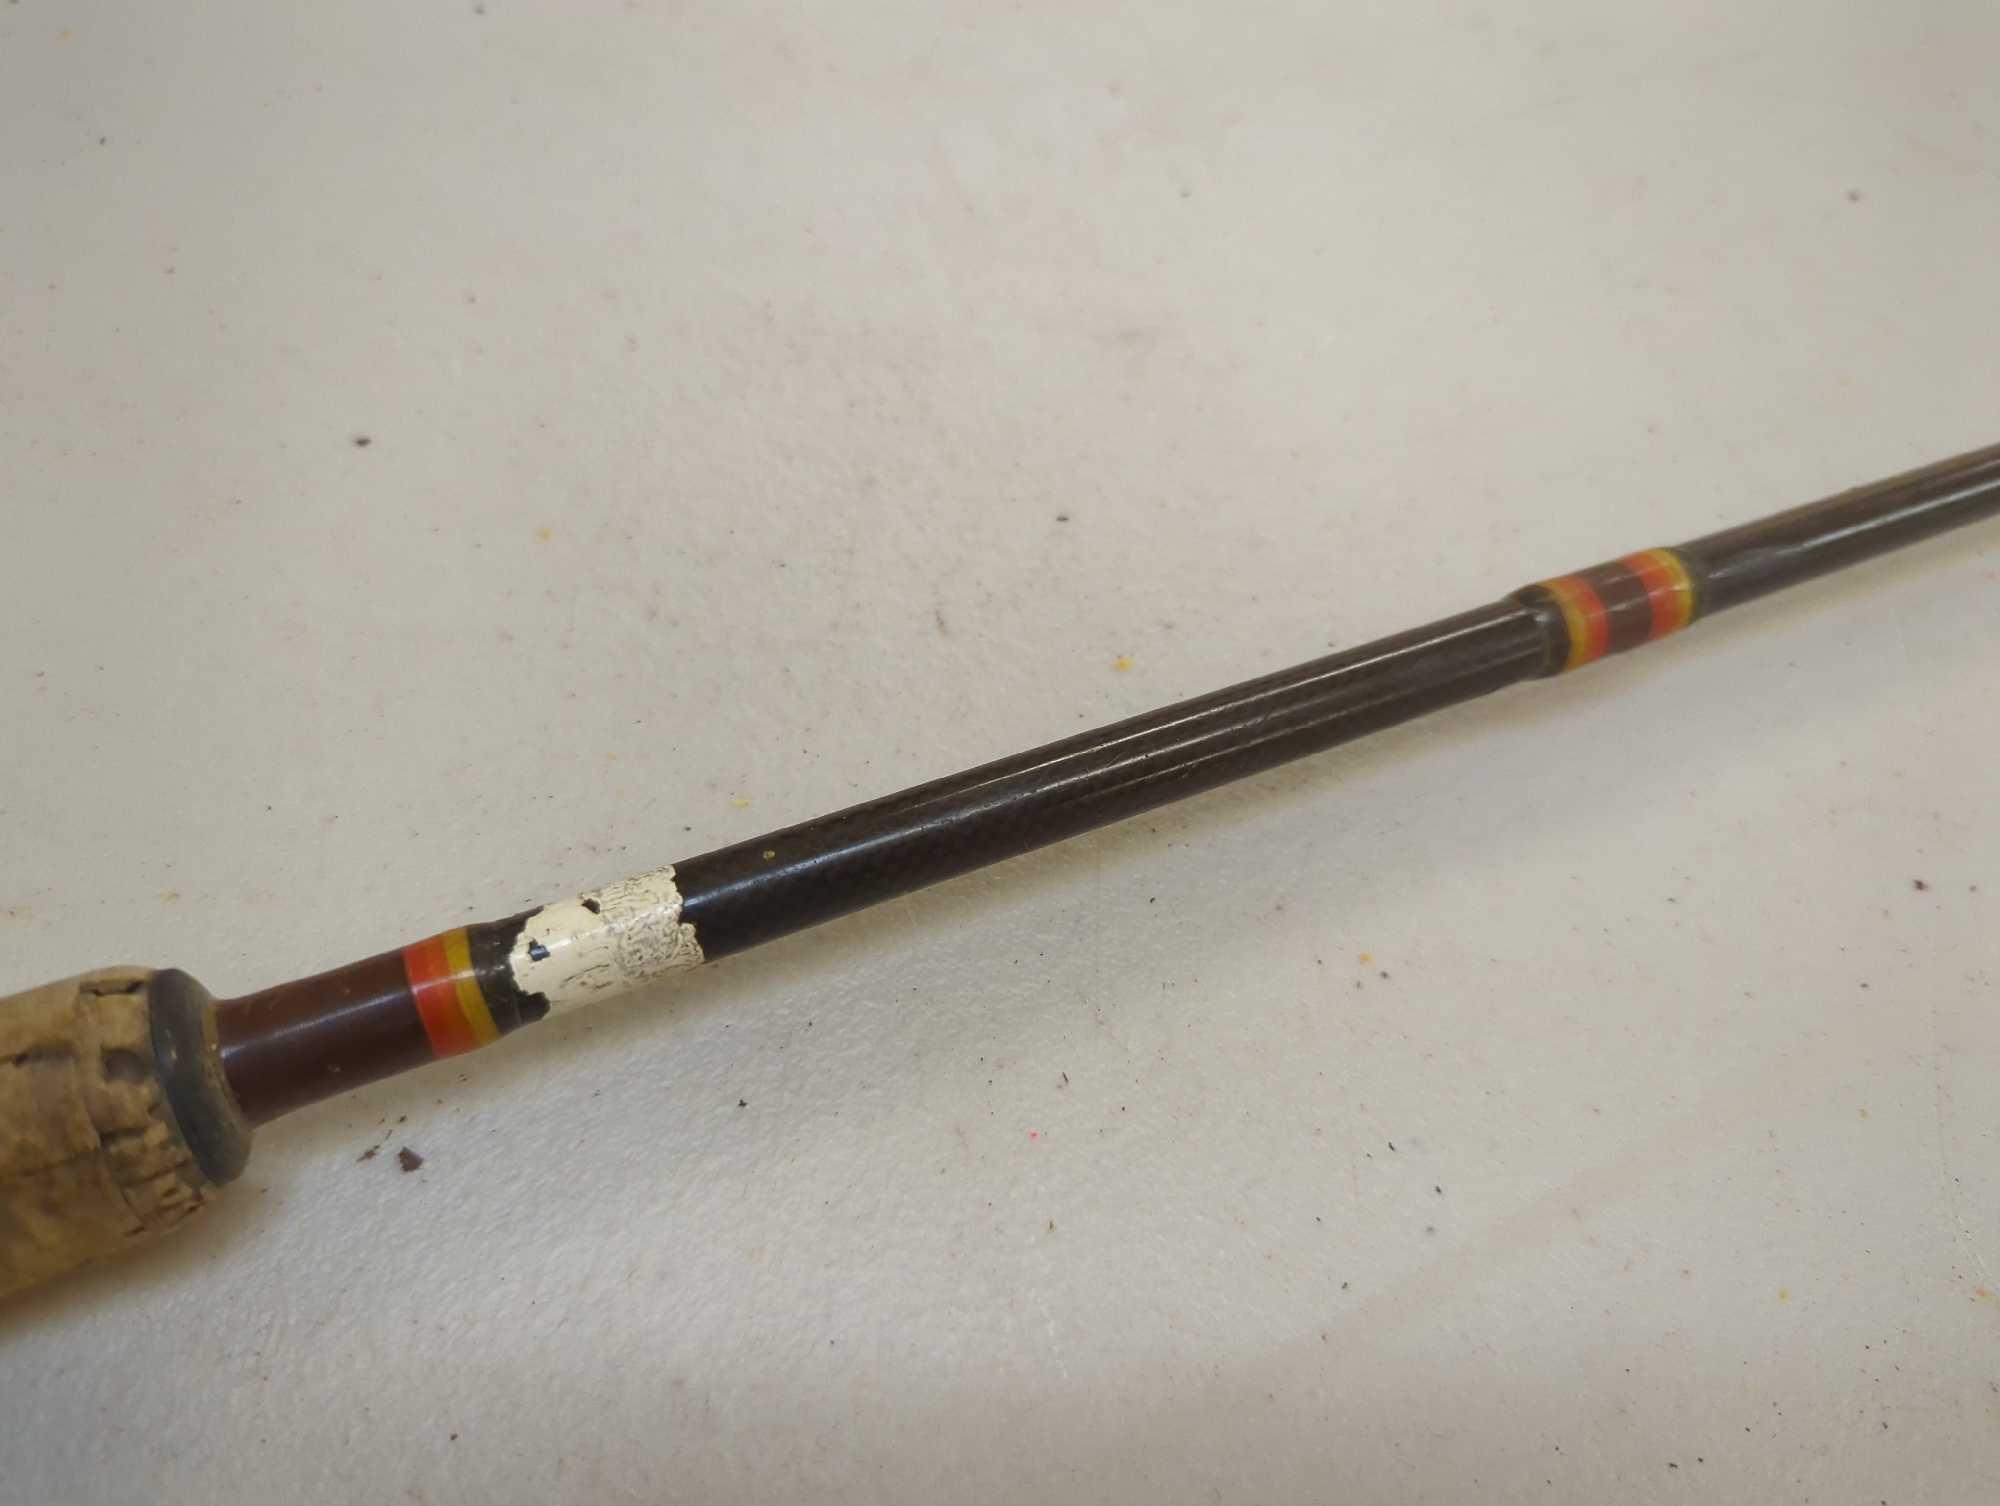 Brown 5'8" fishing rod with spinning reel. Comes as a shown in photos. Appears to be used.